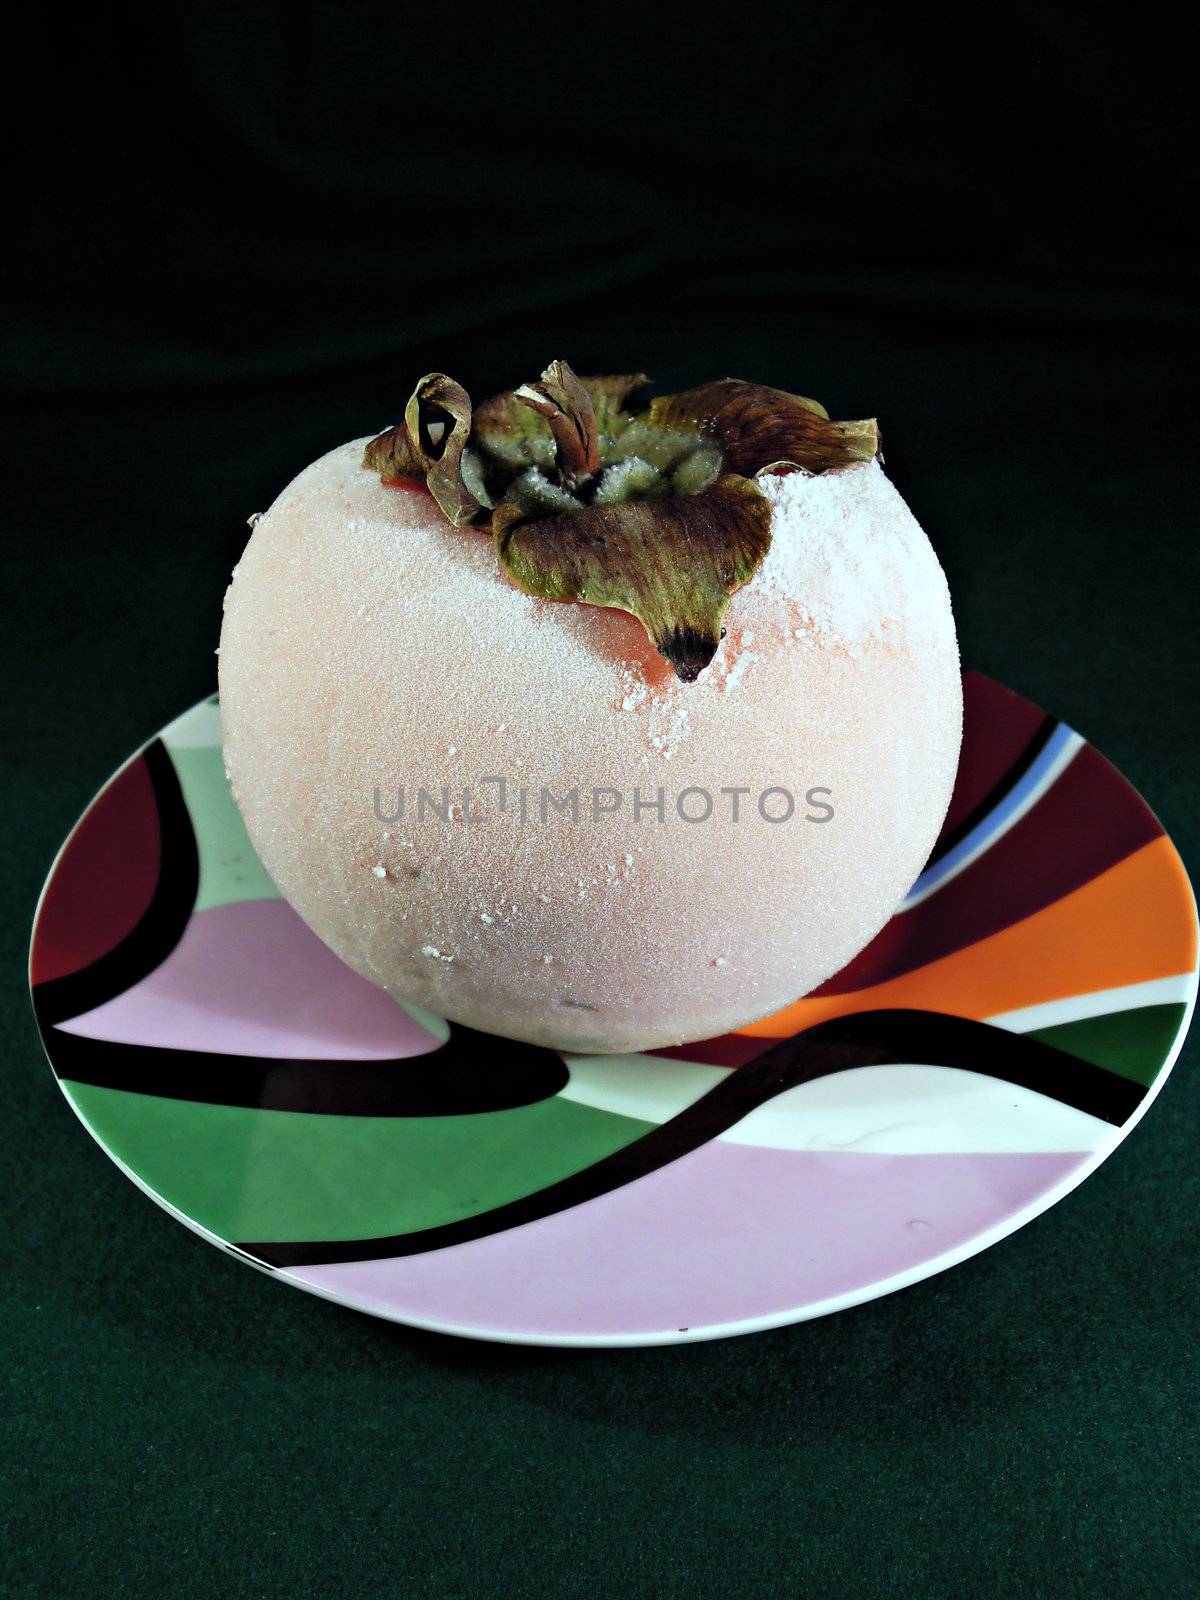 Frozen persimmon with white ice on plate